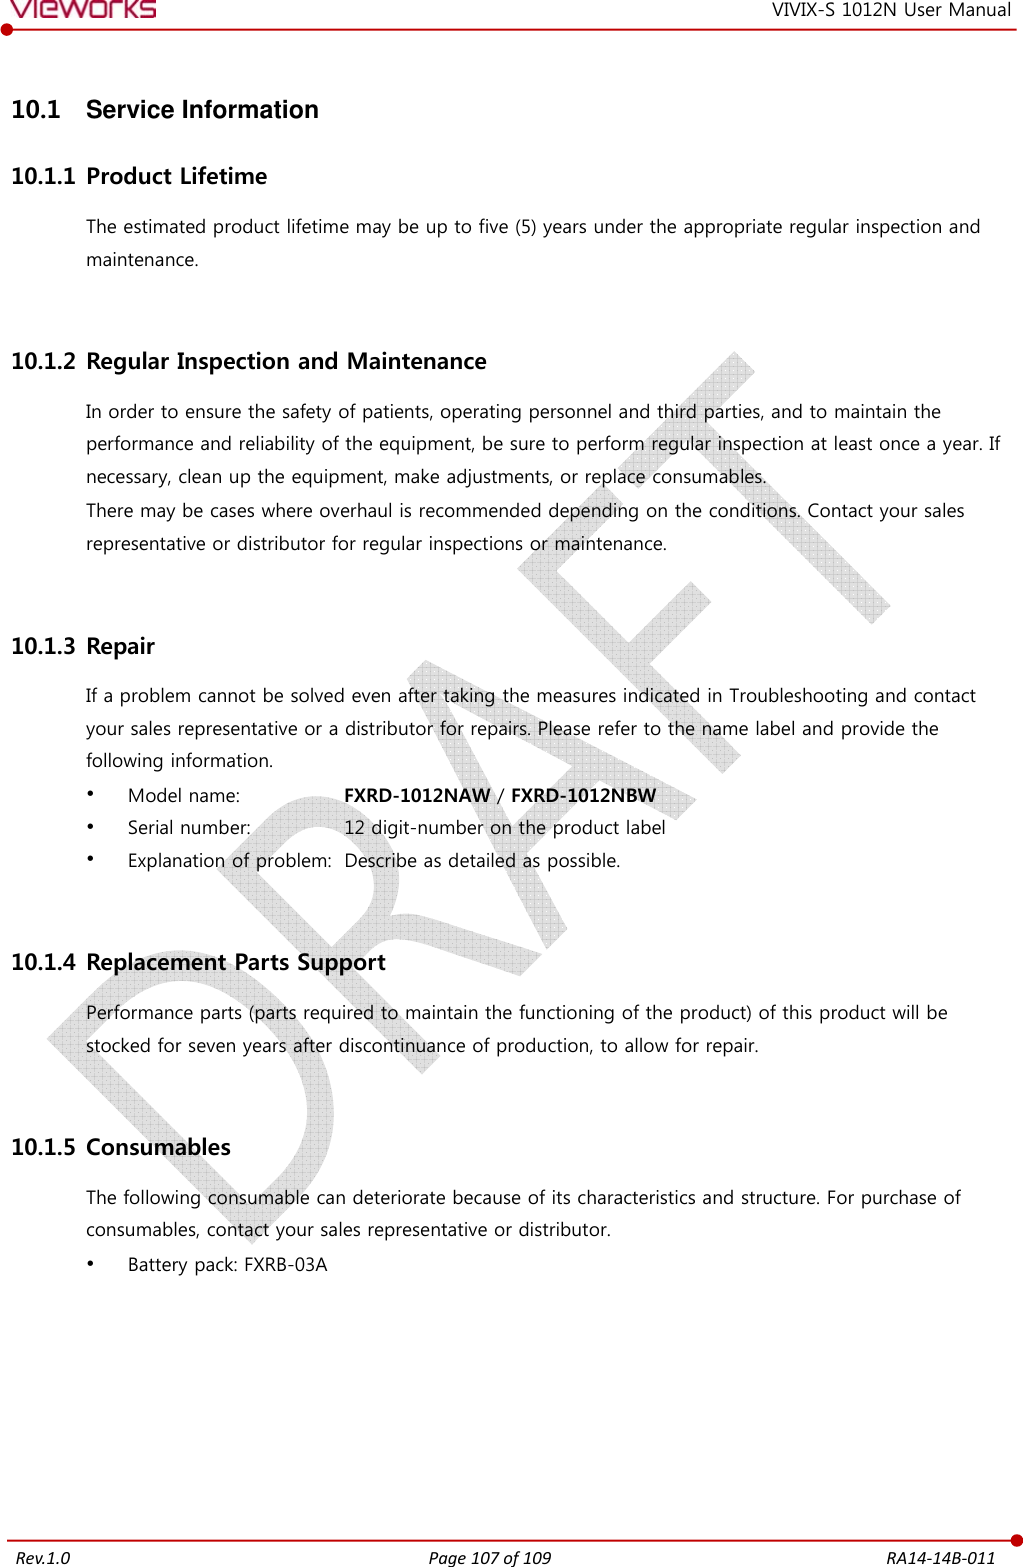   Rev.1.0 Page 107 of 109  RA14-14B-011 VIVIX-S 1012N User Manual 10.1  Service Information 10.1.1 Product Lifetime The estimated product lifetime may be up to five (5) years under the appropriate regular inspection and maintenance.  10.1.2 Regular Inspection and Maintenance In order to ensure the safety of patients, operating personnel and third parties, and to maintain the performance and reliability of the equipment, be sure to perform regular inspection at least once a year. If necessary, clean up the equipment, make adjustments, or replace consumables. There may be cases where overhaul is recommended depending on the conditions. Contact your sales representative or distributor for regular inspections or maintenance.  10.1.3 Repair If a problem cannot be solved even after taking the measures indicated in Troubleshooting and contact your sales representative or a distributor for repairs. Please refer to the name label and provide the following information.  Model name:    FXRD-1012NAW / FXRD-1012NBW  Serial number:    12 digit-number on the product label  Explanation of problem:  Describe as detailed as possible.  10.1.4 Replacement Parts Support Performance parts (parts required to maintain the functioning of the product) of this product will be stocked for seven years after discontinuance of production, to allow for repair.  10.1.5 Consumables The following consumable can deteriorate because of its characteristics and structure. For purchase of consumables, contact your sales representative or distributor.  Battery pack: FXRB-03A 